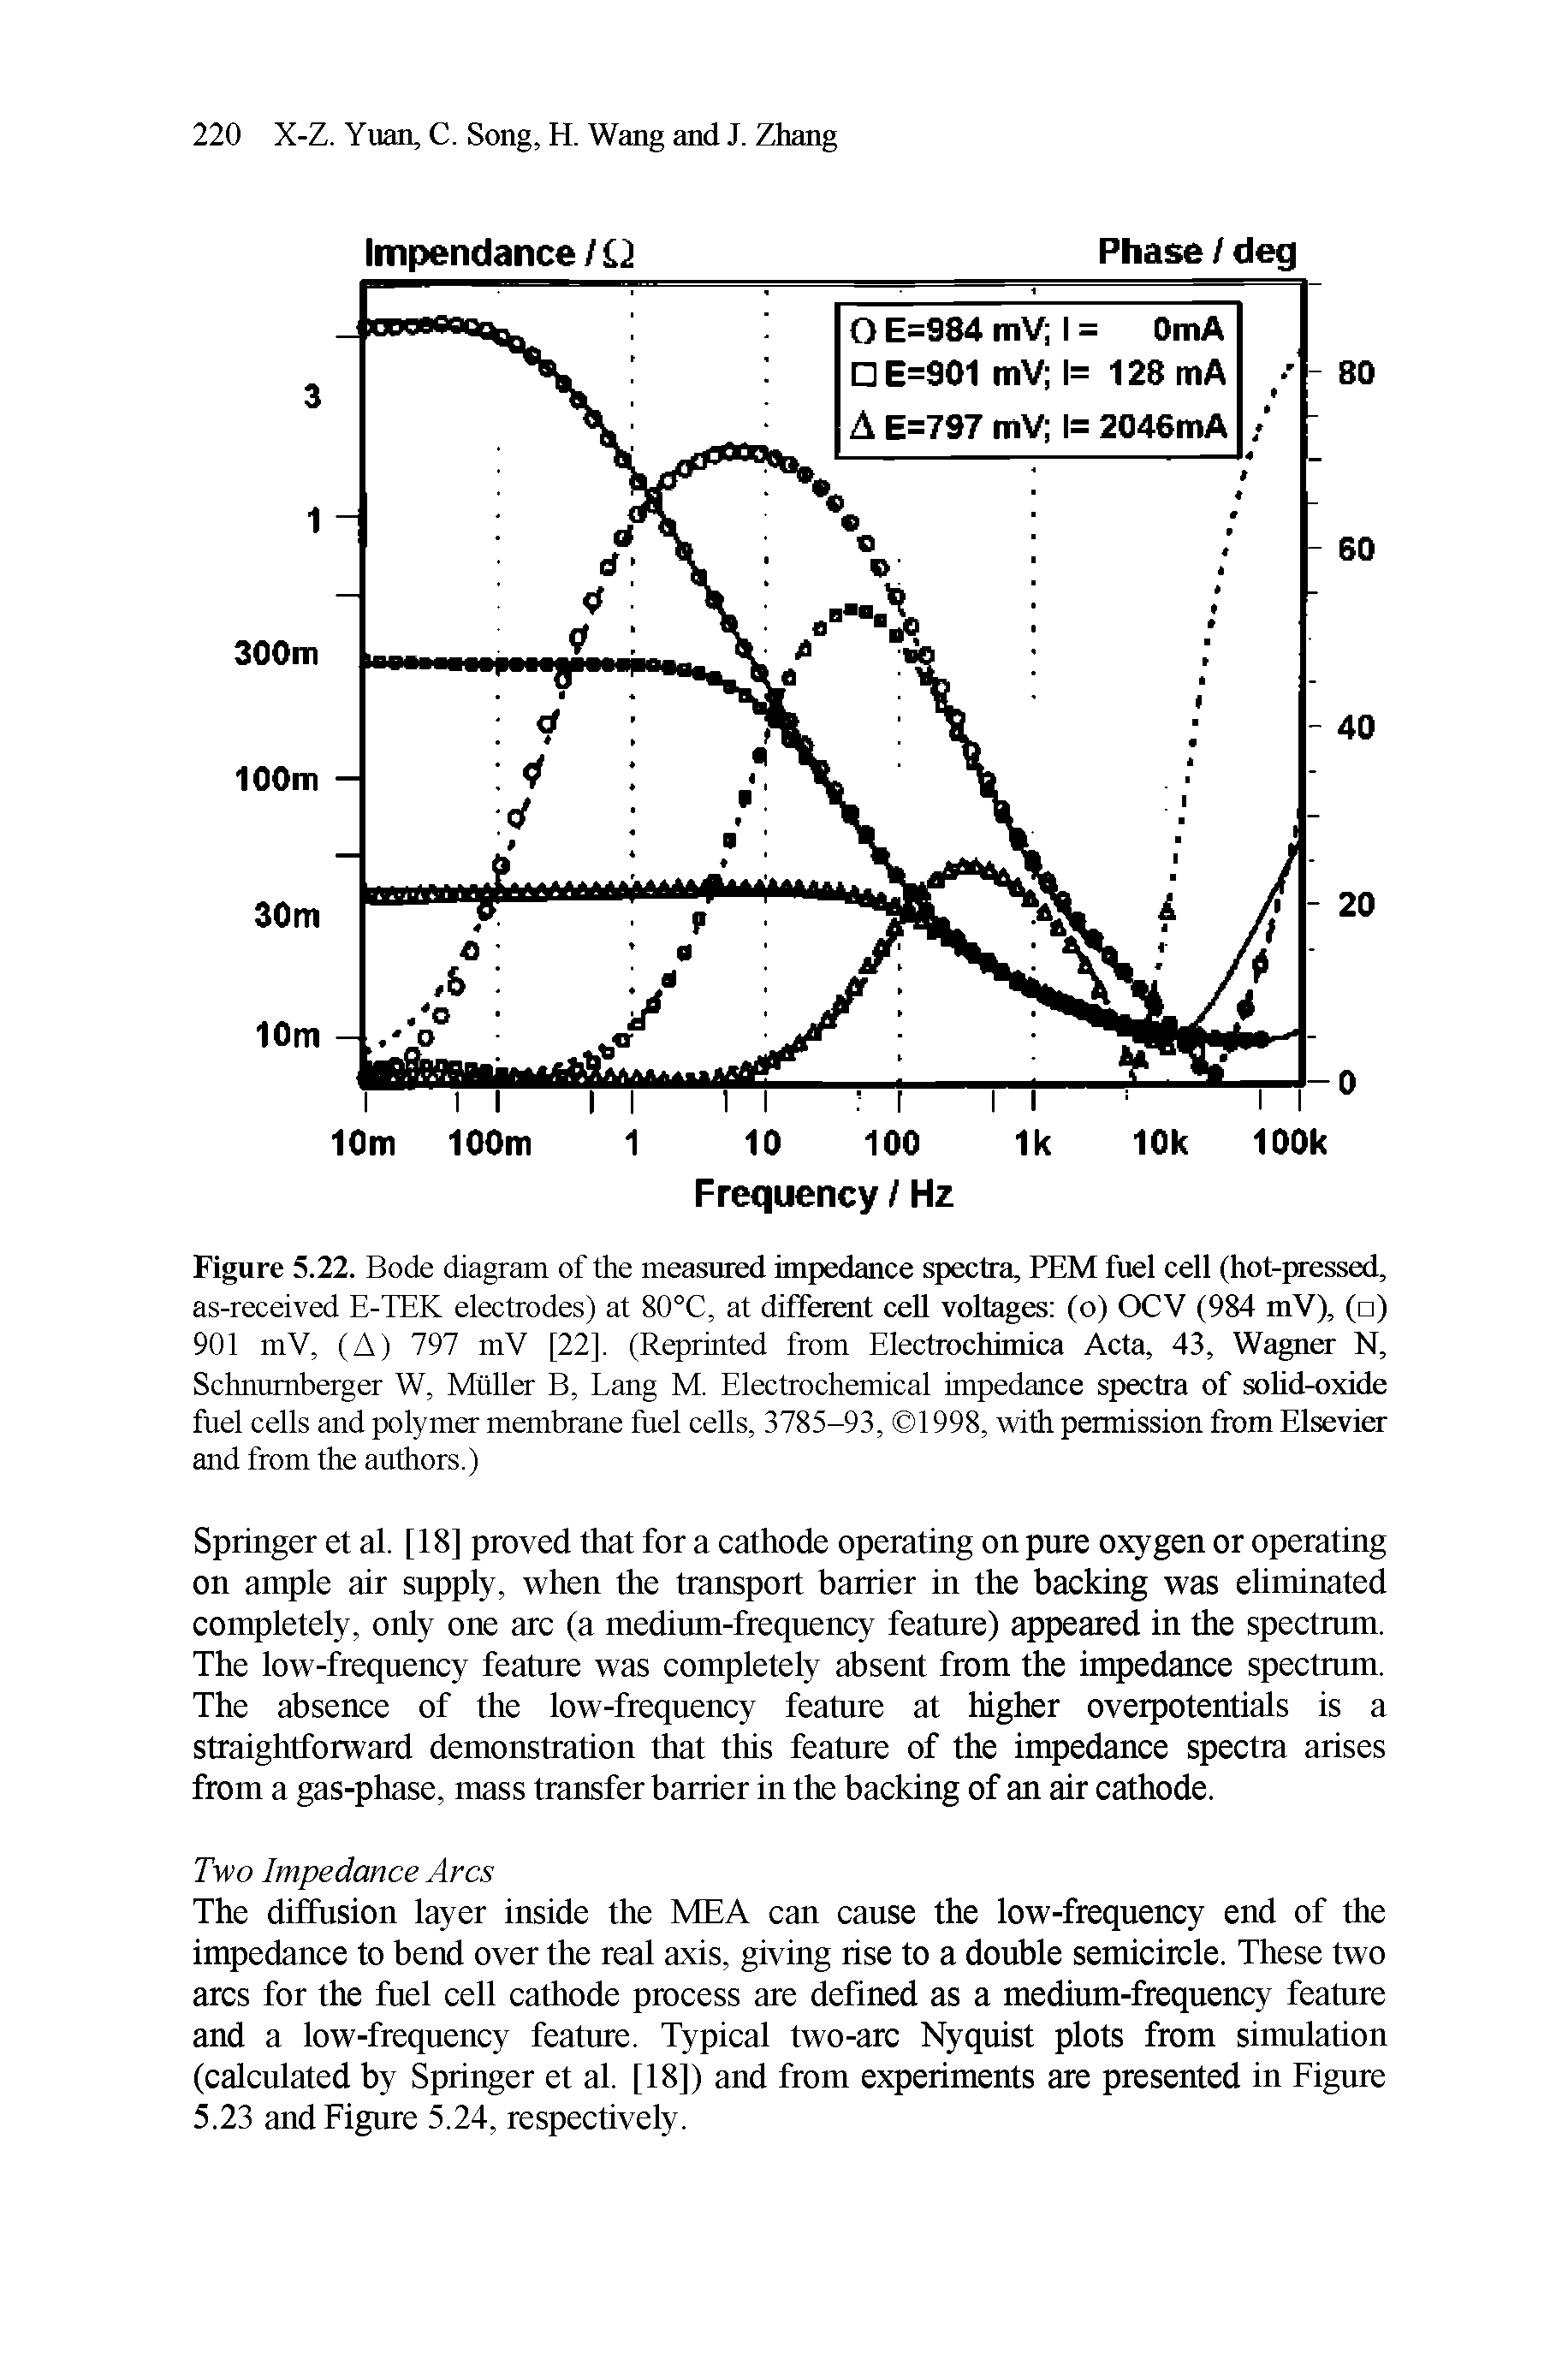 Figure 5.22. Bode diagram of the measured impedance spectra, PEM fuel cell (hot-pressed, as-received E-TEK electrodes) at 80°C, at different cell voltages (o) OCV (984 mV), ( ) 901 mV, (A) 797 mV [22], (Reprinted from Electrochimica Acta, 43, Wagner N, Schnumberger W, Muller B, Lang M. Electrochemical impedance spectra of solid-oxide fuel cells and polymer membrane fuel cells, 3785-93, 1998, with permission from Elsevier and from the authors.)...